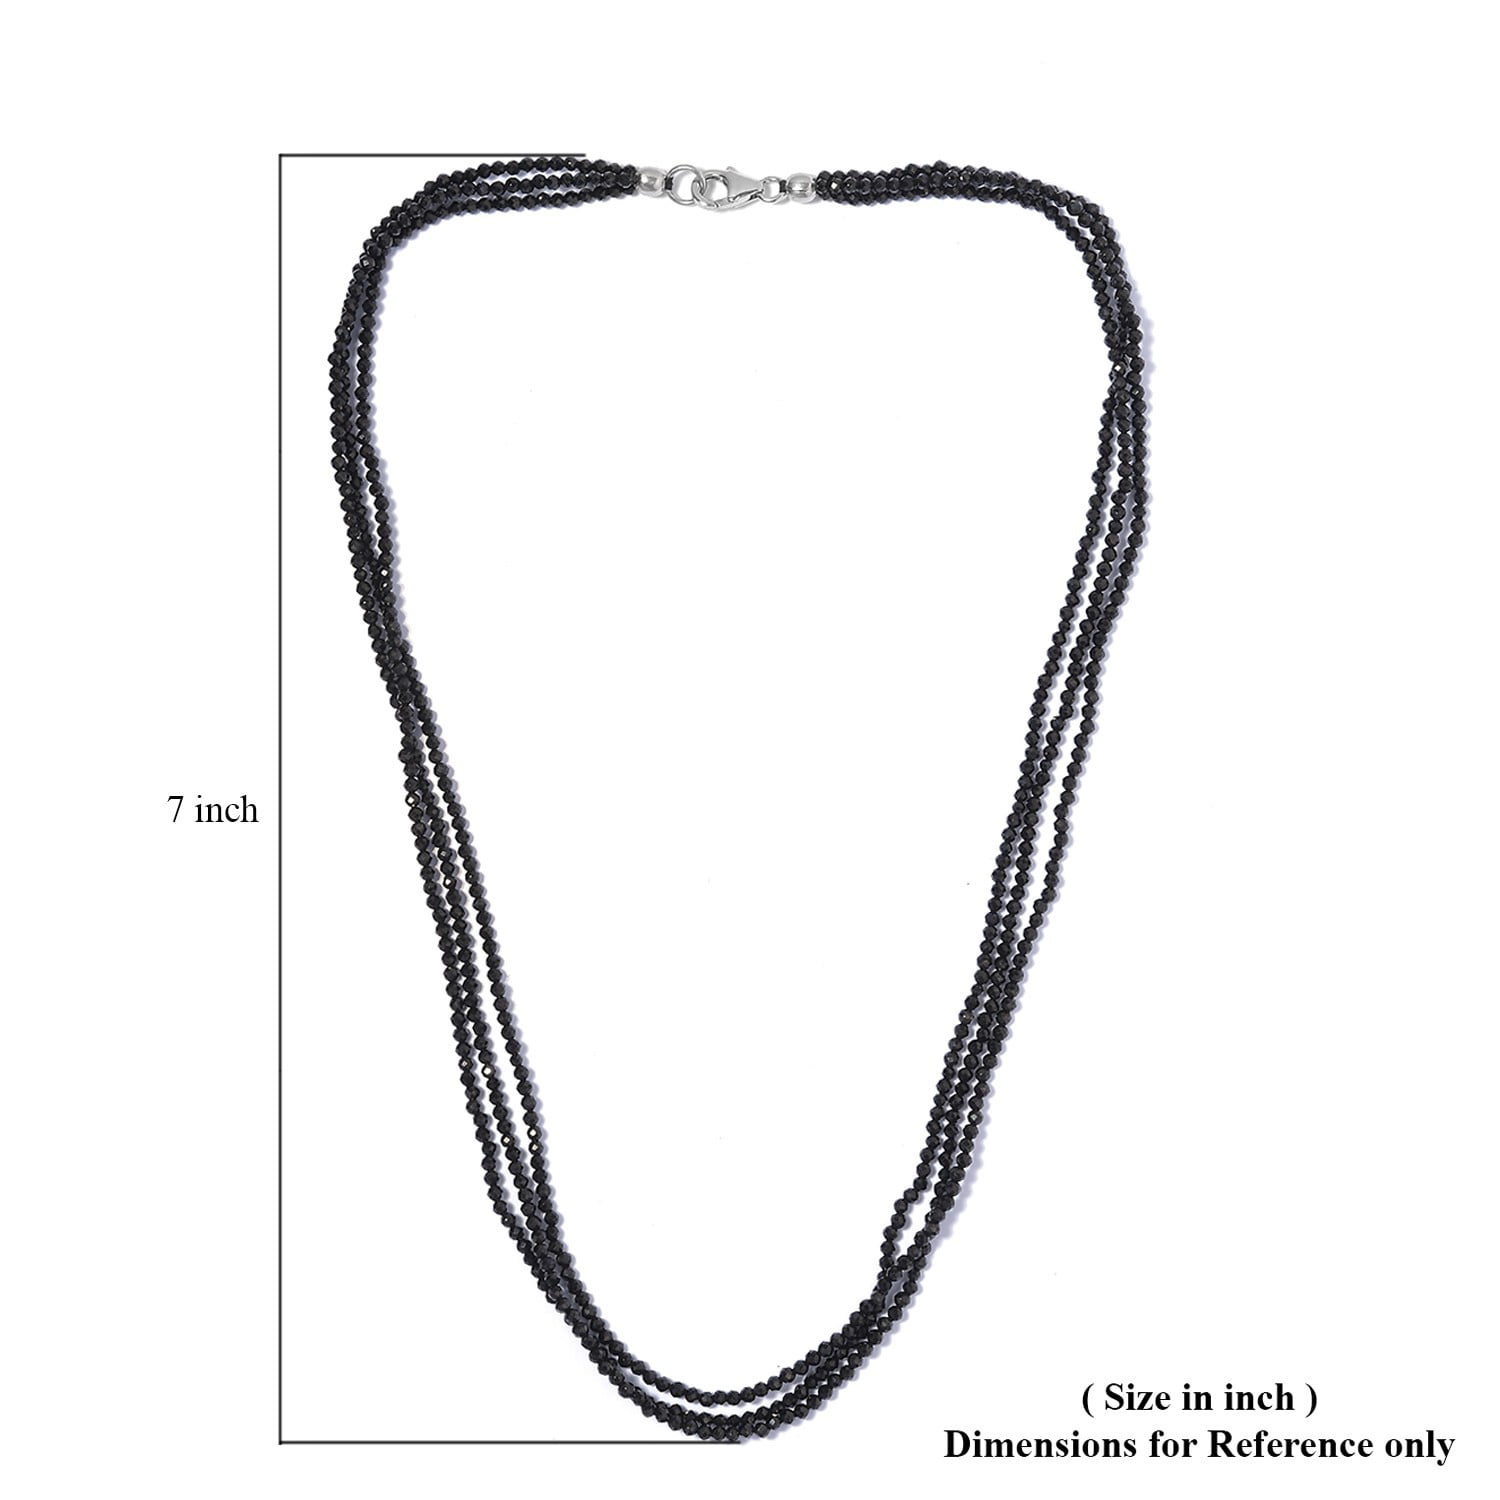 Details about   925 Silver Black Spinel Bead Strand Necklace Jewelry Women Handmade USA SELLER